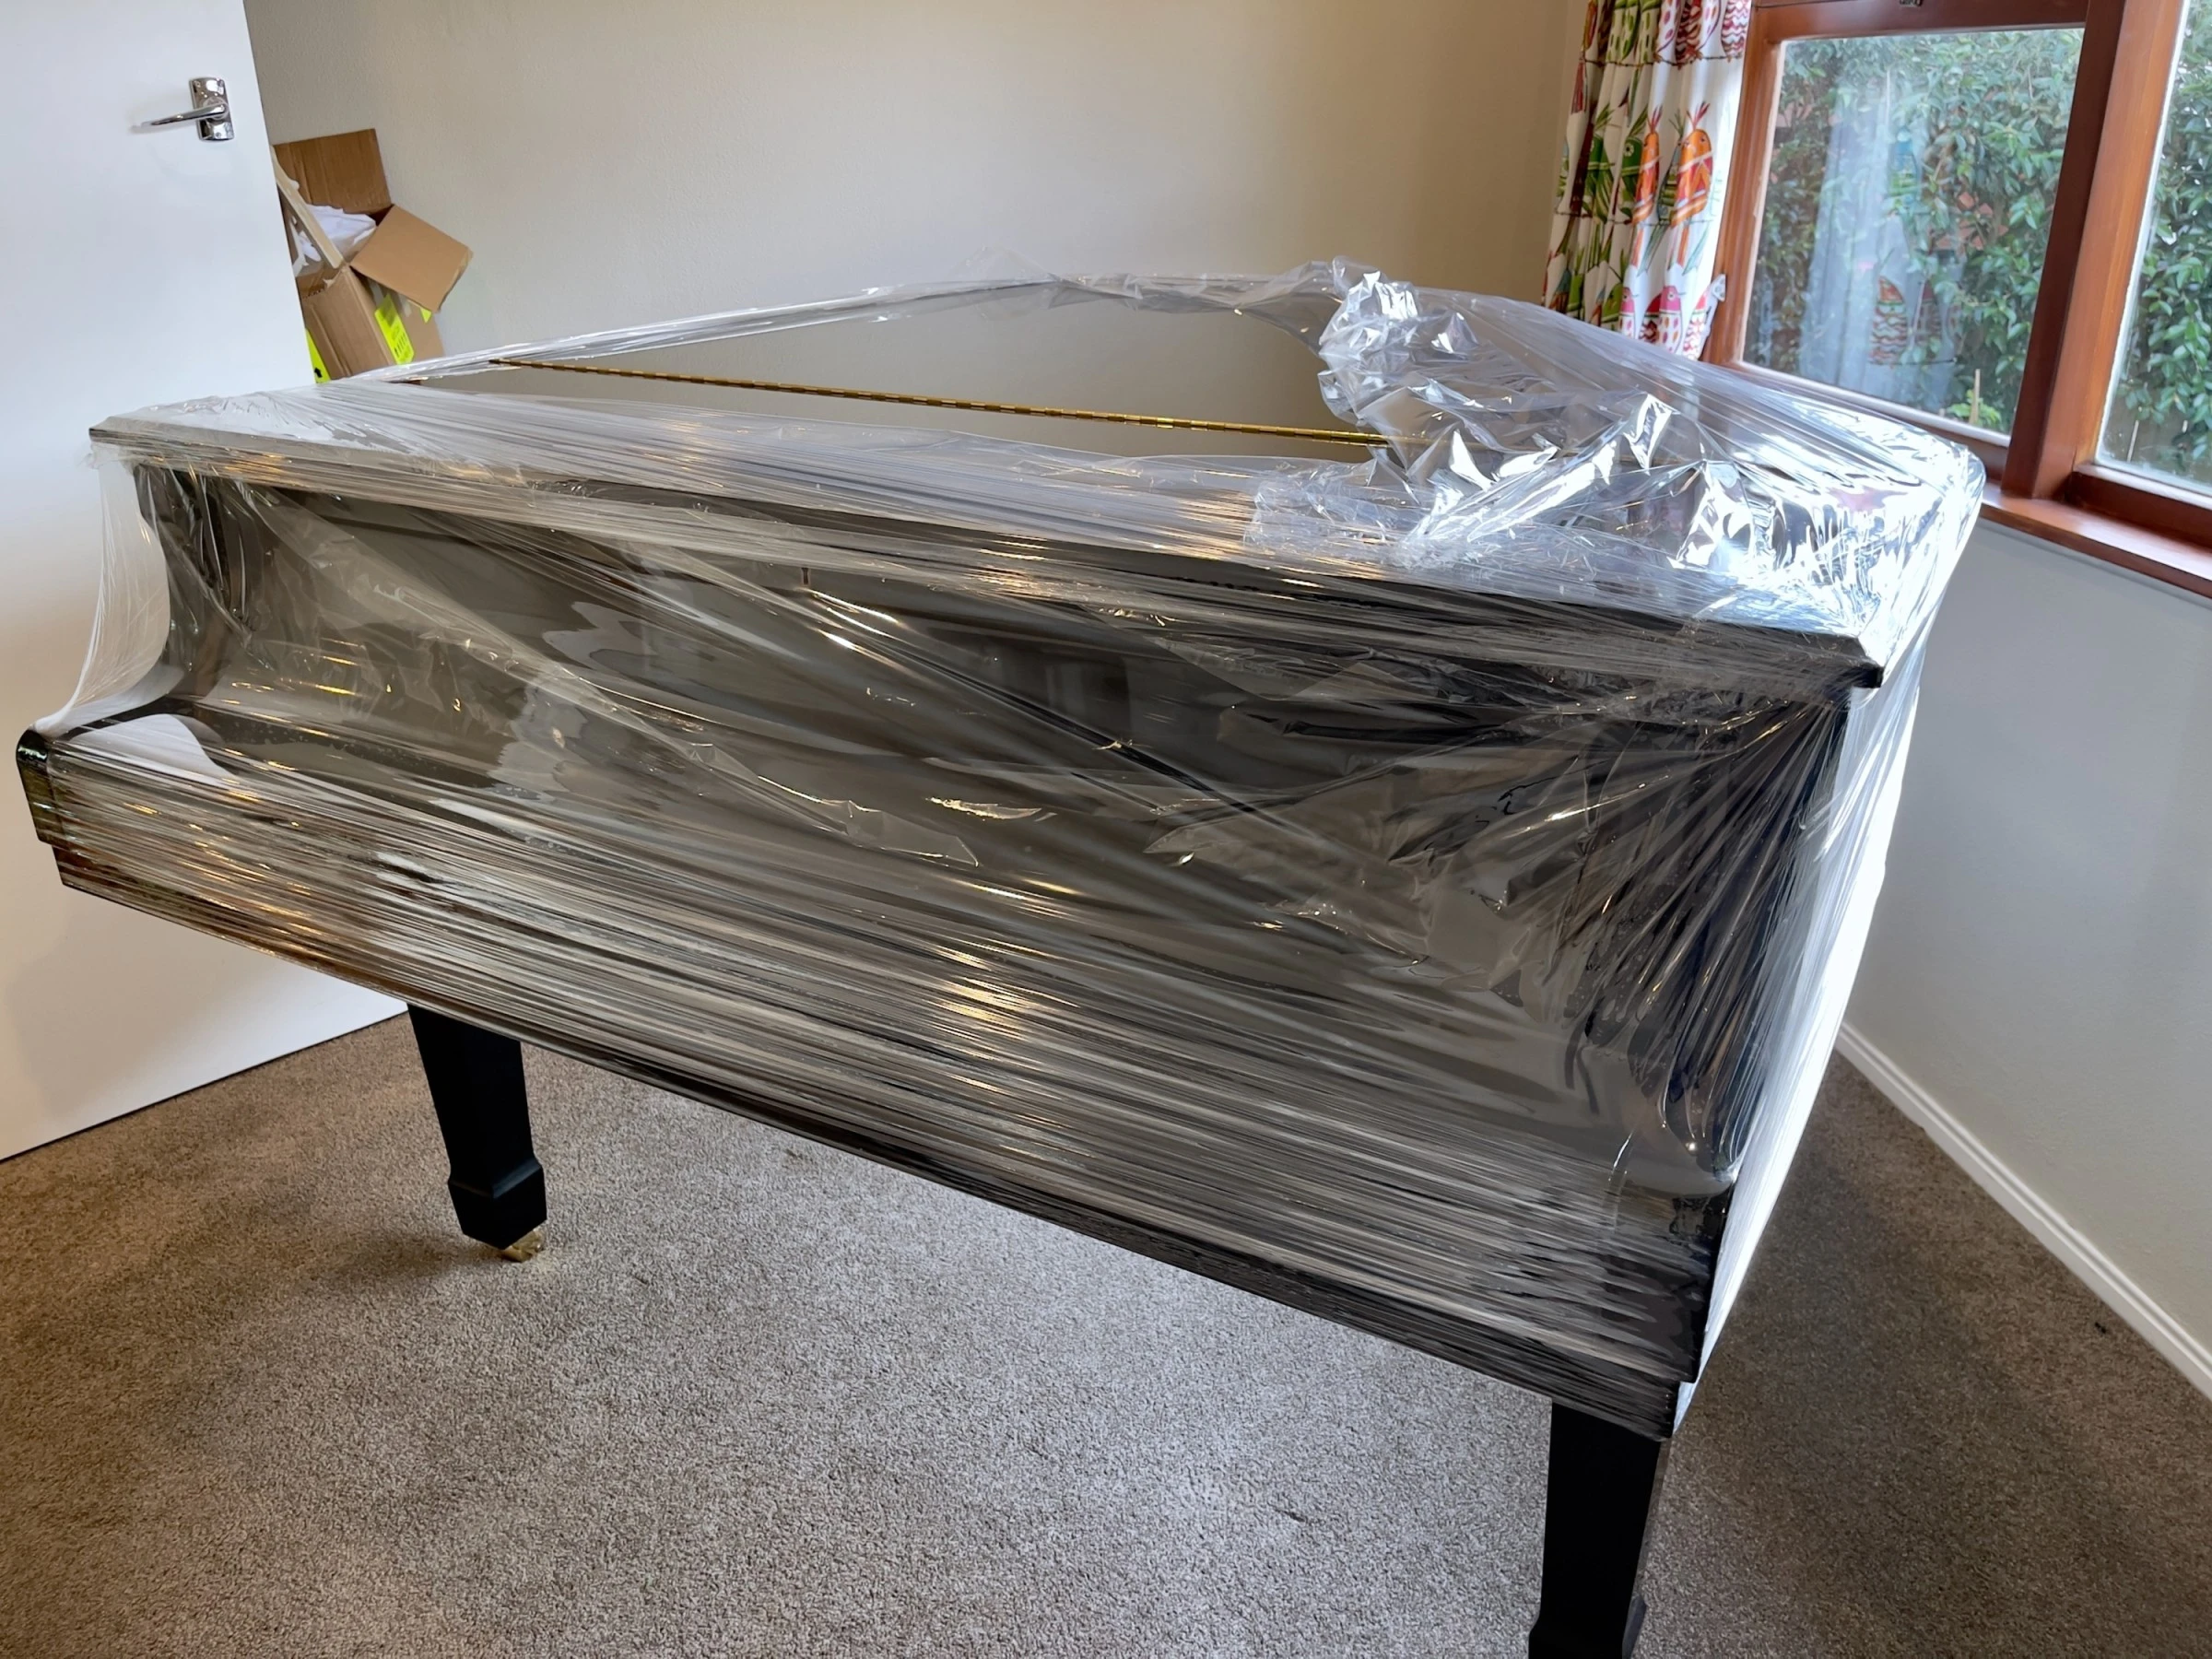 Here's How to Move a Piano Safely With No Damages